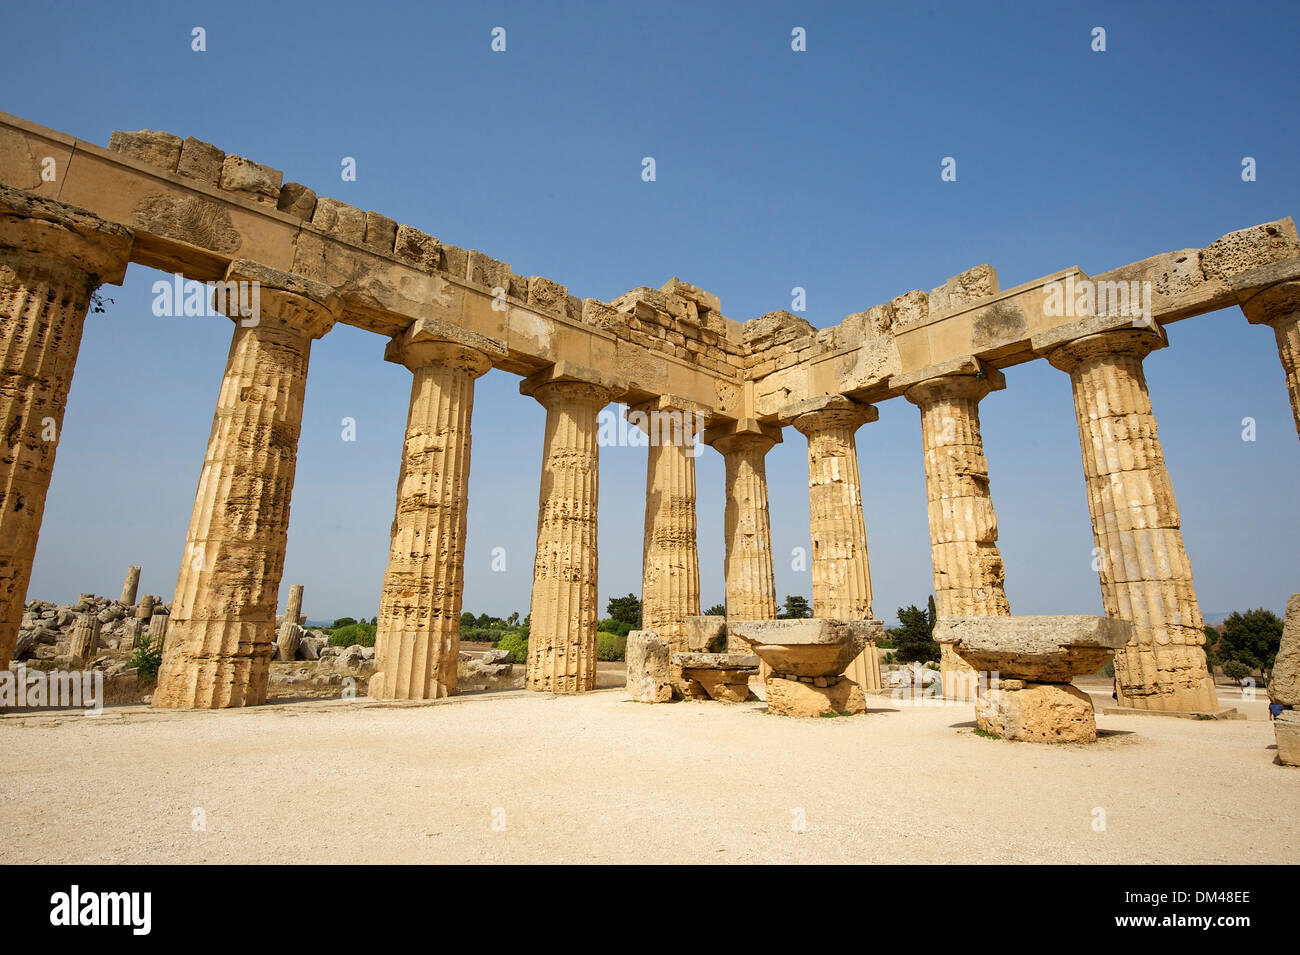 Italy Sicily South Italy Europe island temple of Hera Selinunt temple architecture building construction history historical Stock Photo